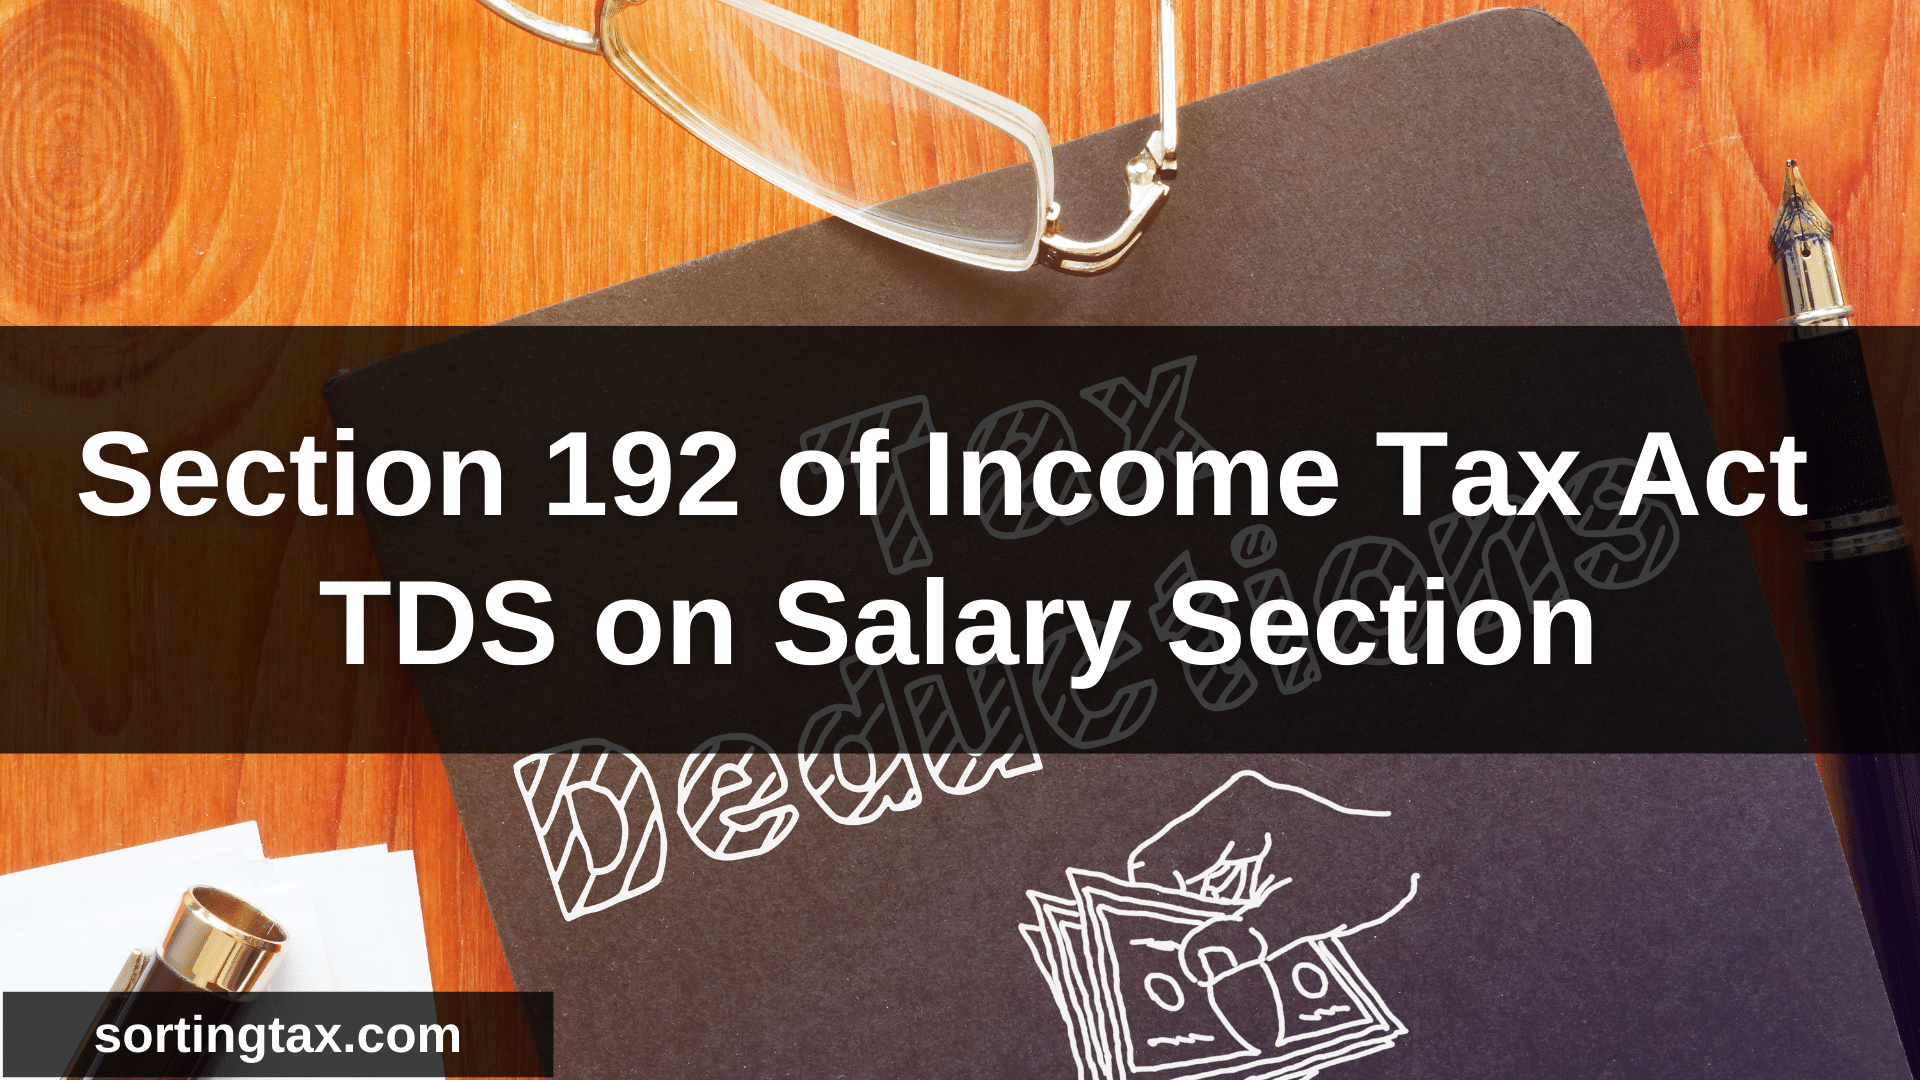 Section 192 of Income Tax Act - TDS on Salary Section